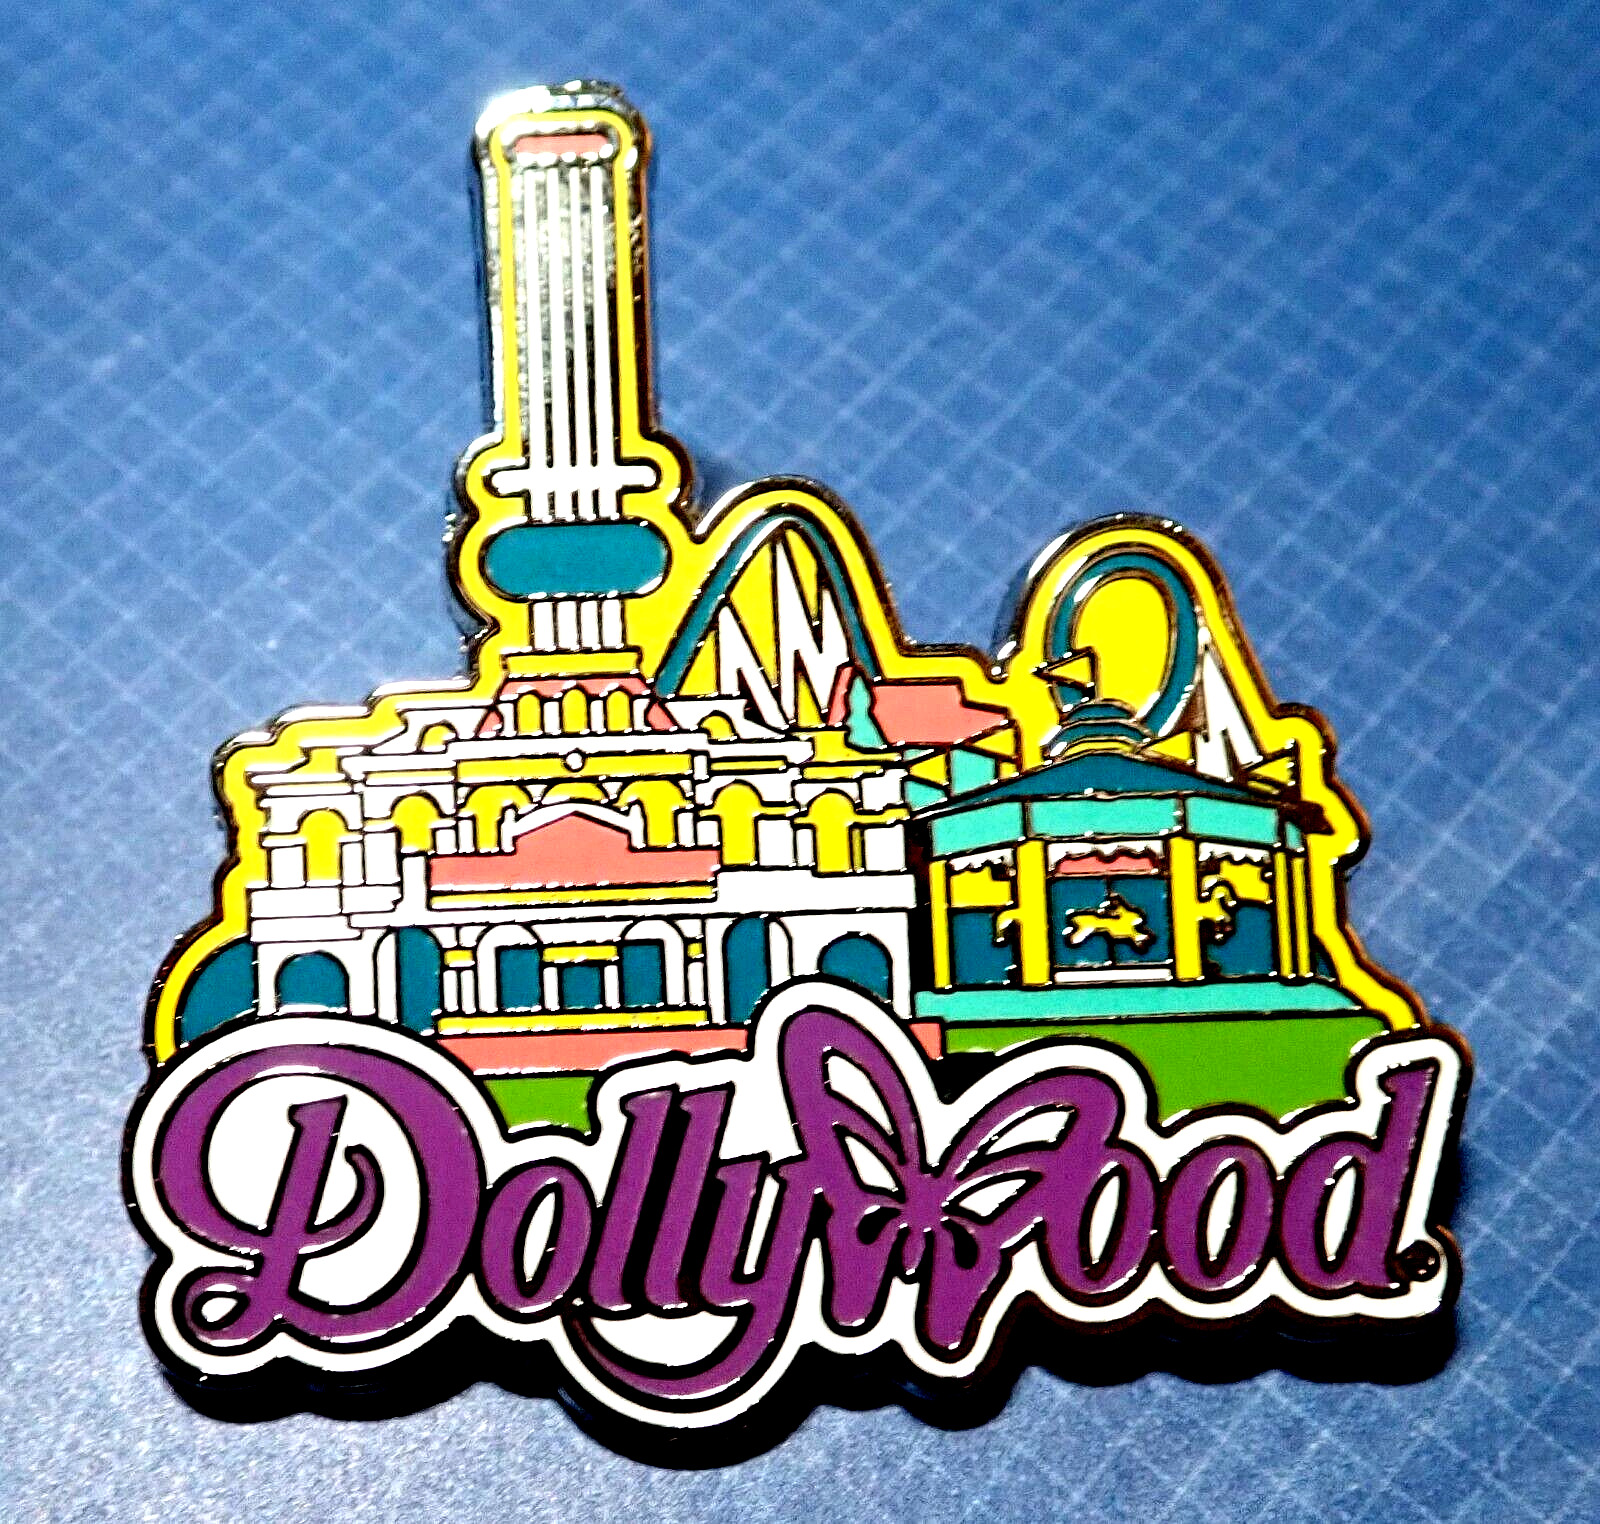 BEAUTIFUL VINTAGE DOLLYWOOD CLOISONNE COMPOSITE PIN BADGE NASHVILLE TENNESSEE